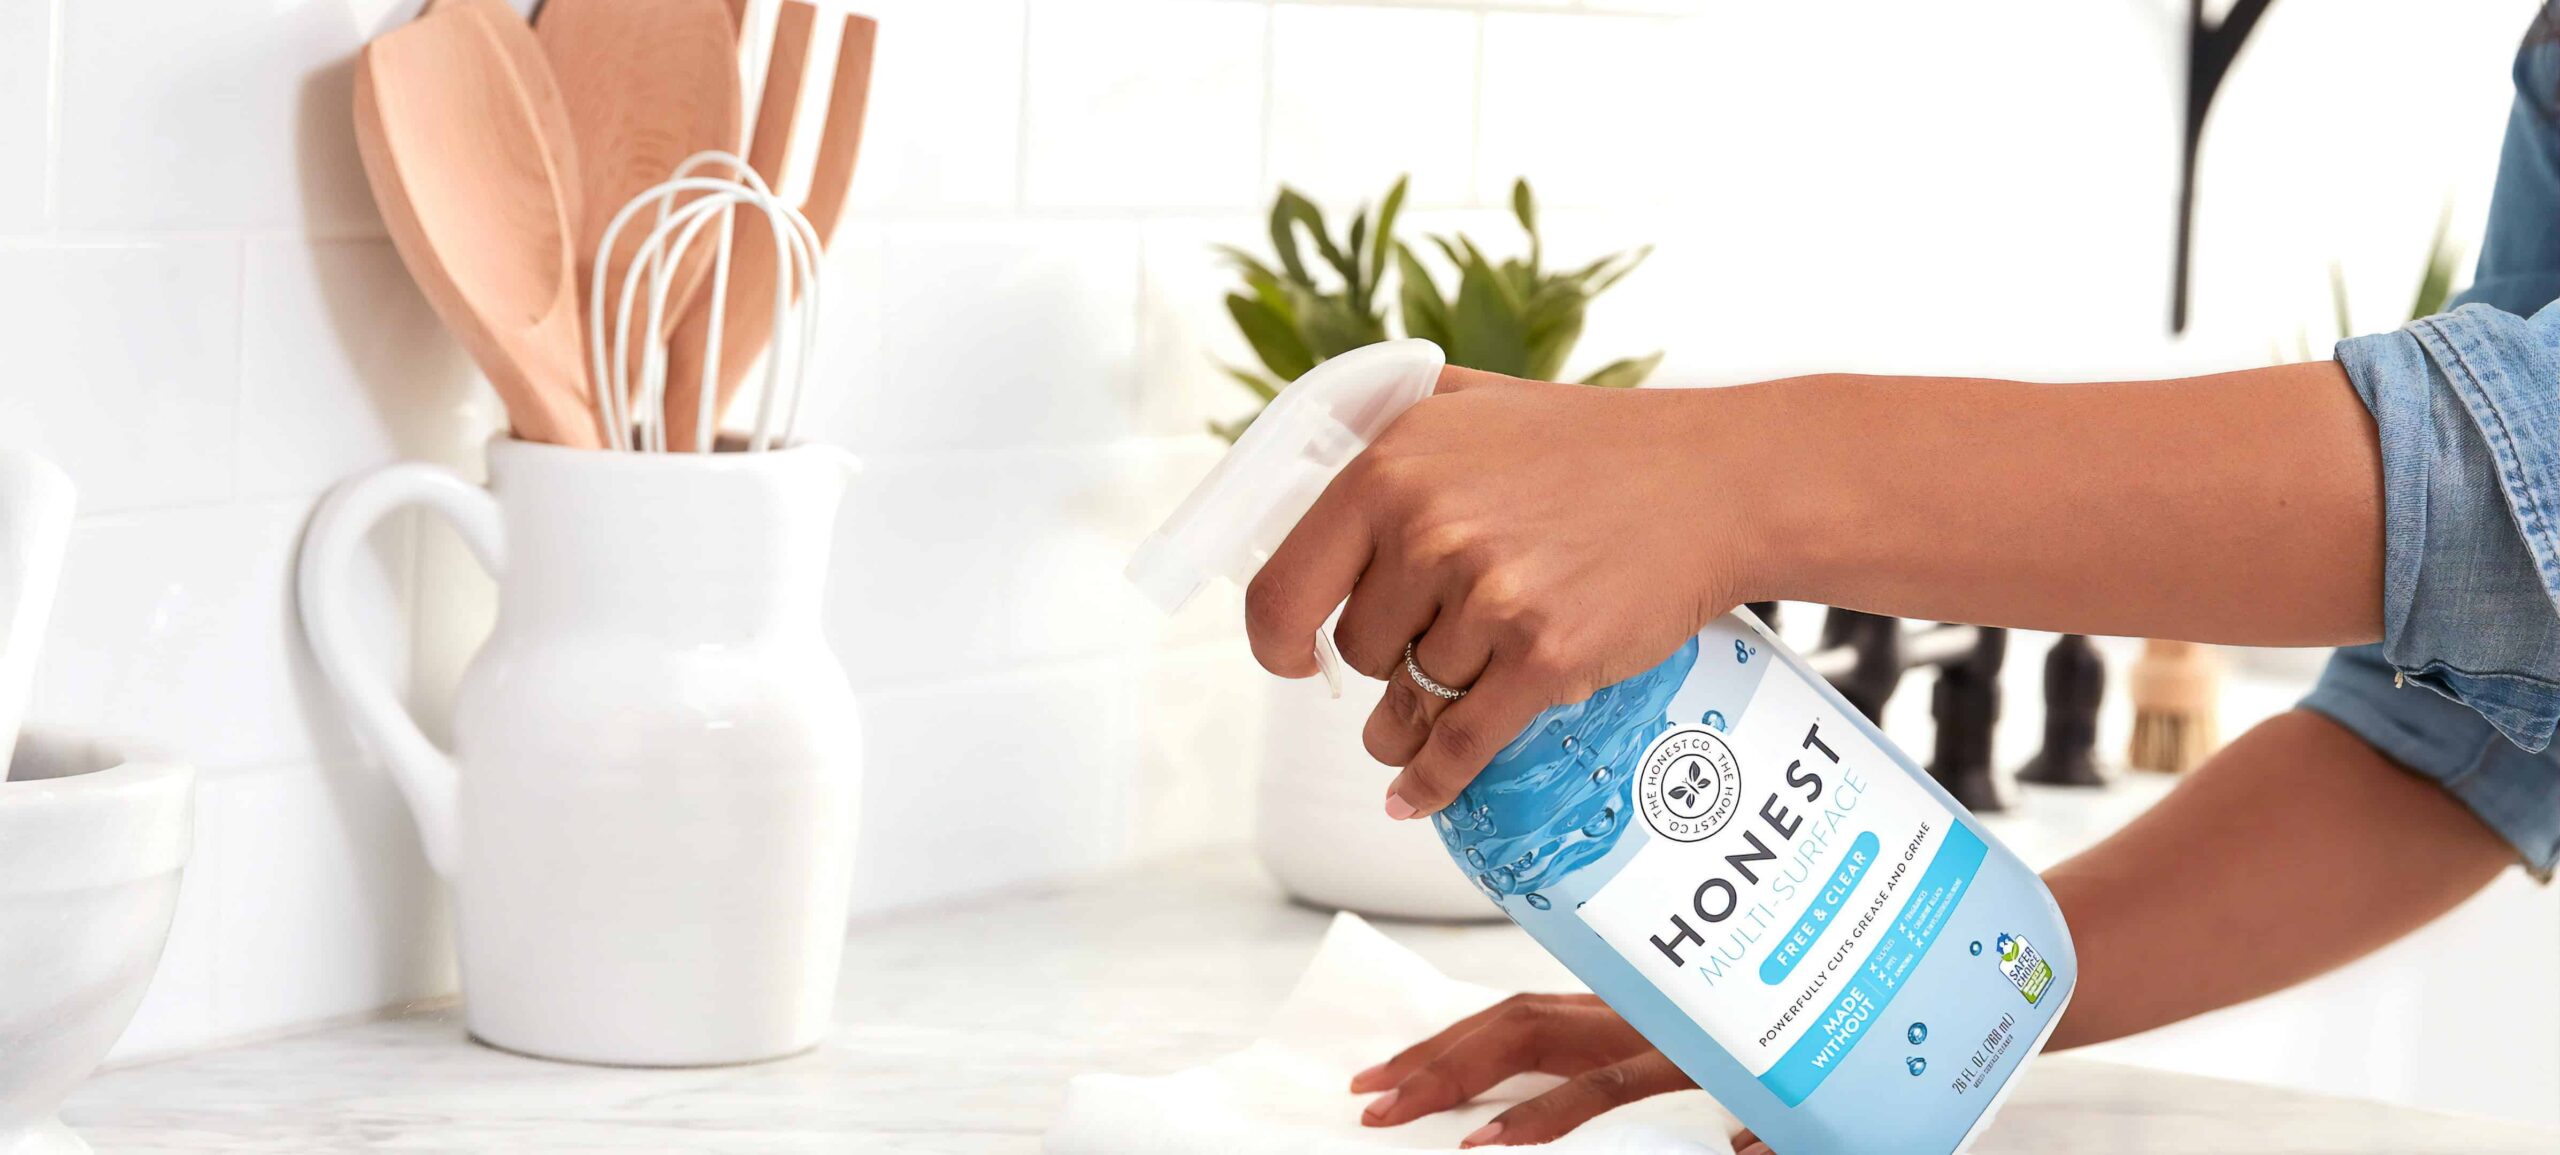 Person spraying Honest Company Multi-surface cleaner on white kitchen counter.